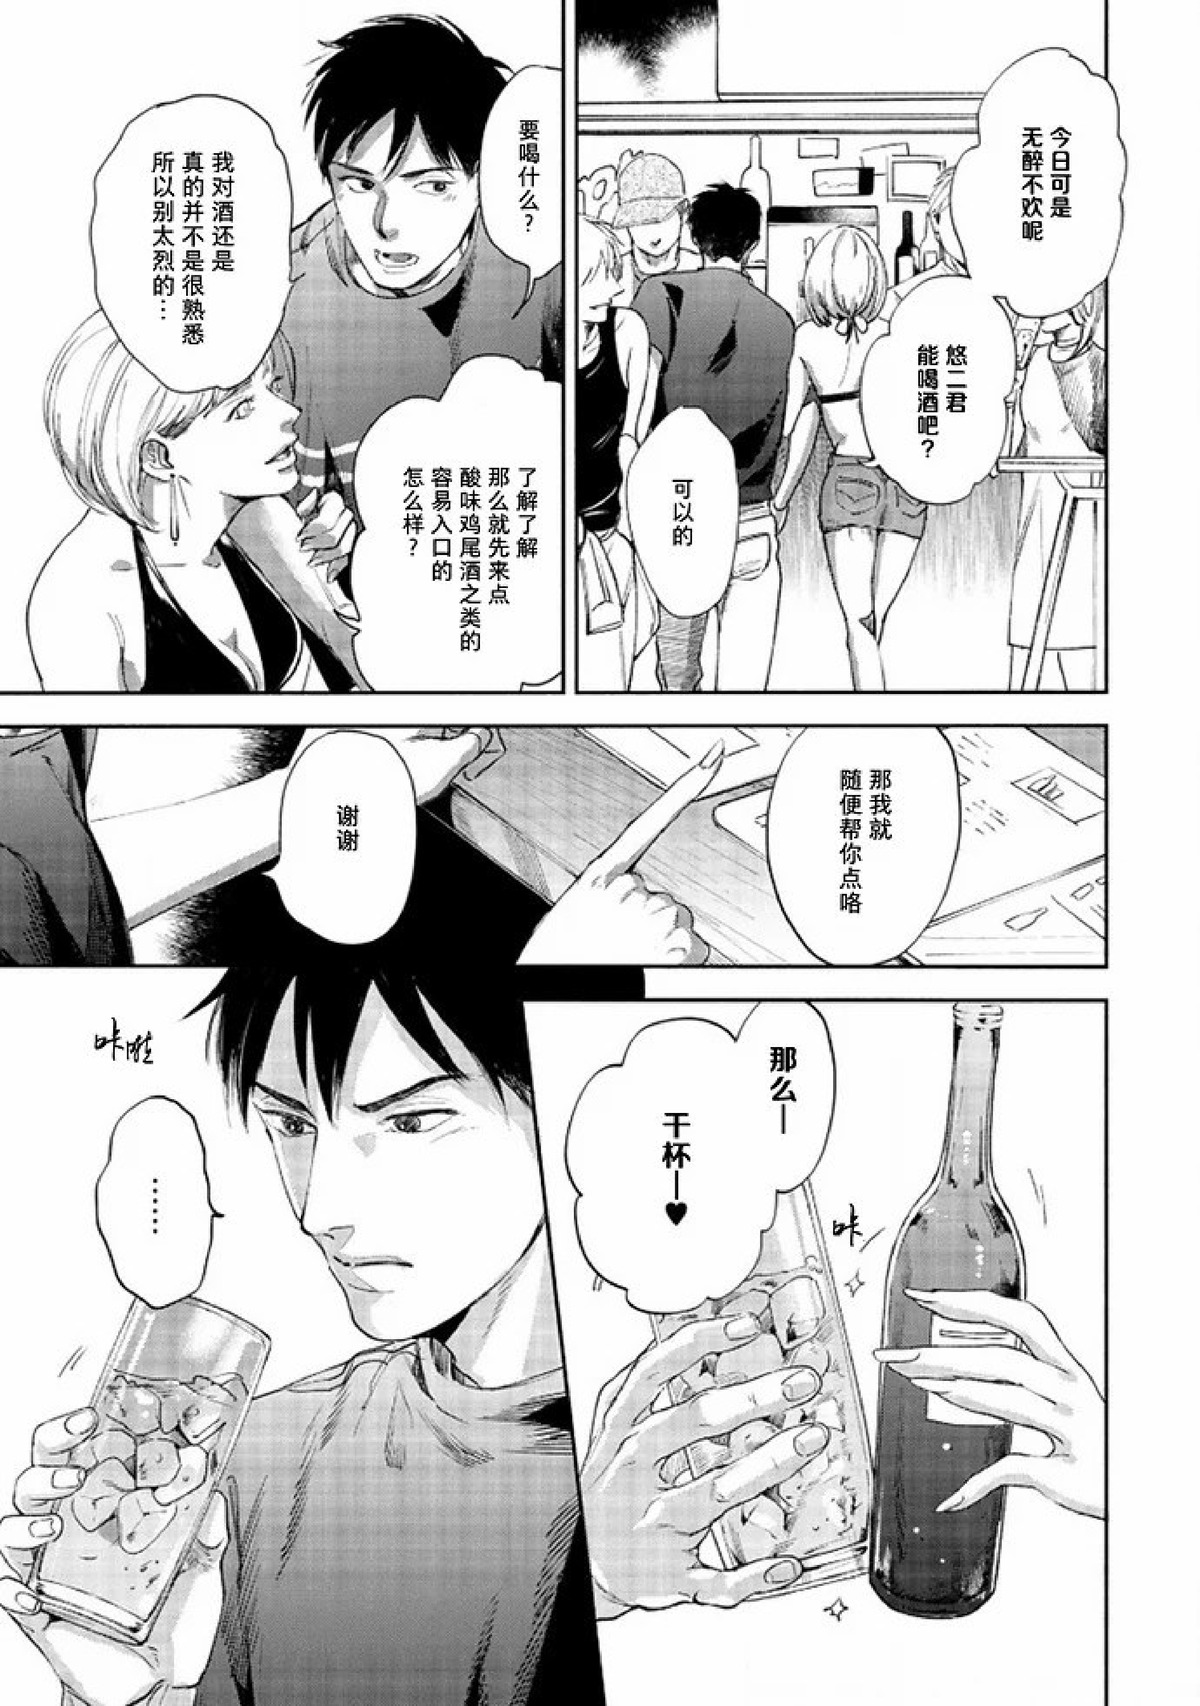 【Two sides of the same coin[腐漫]】漫画-（上卷01-02）章节漫画下拉式图片-43.jpg